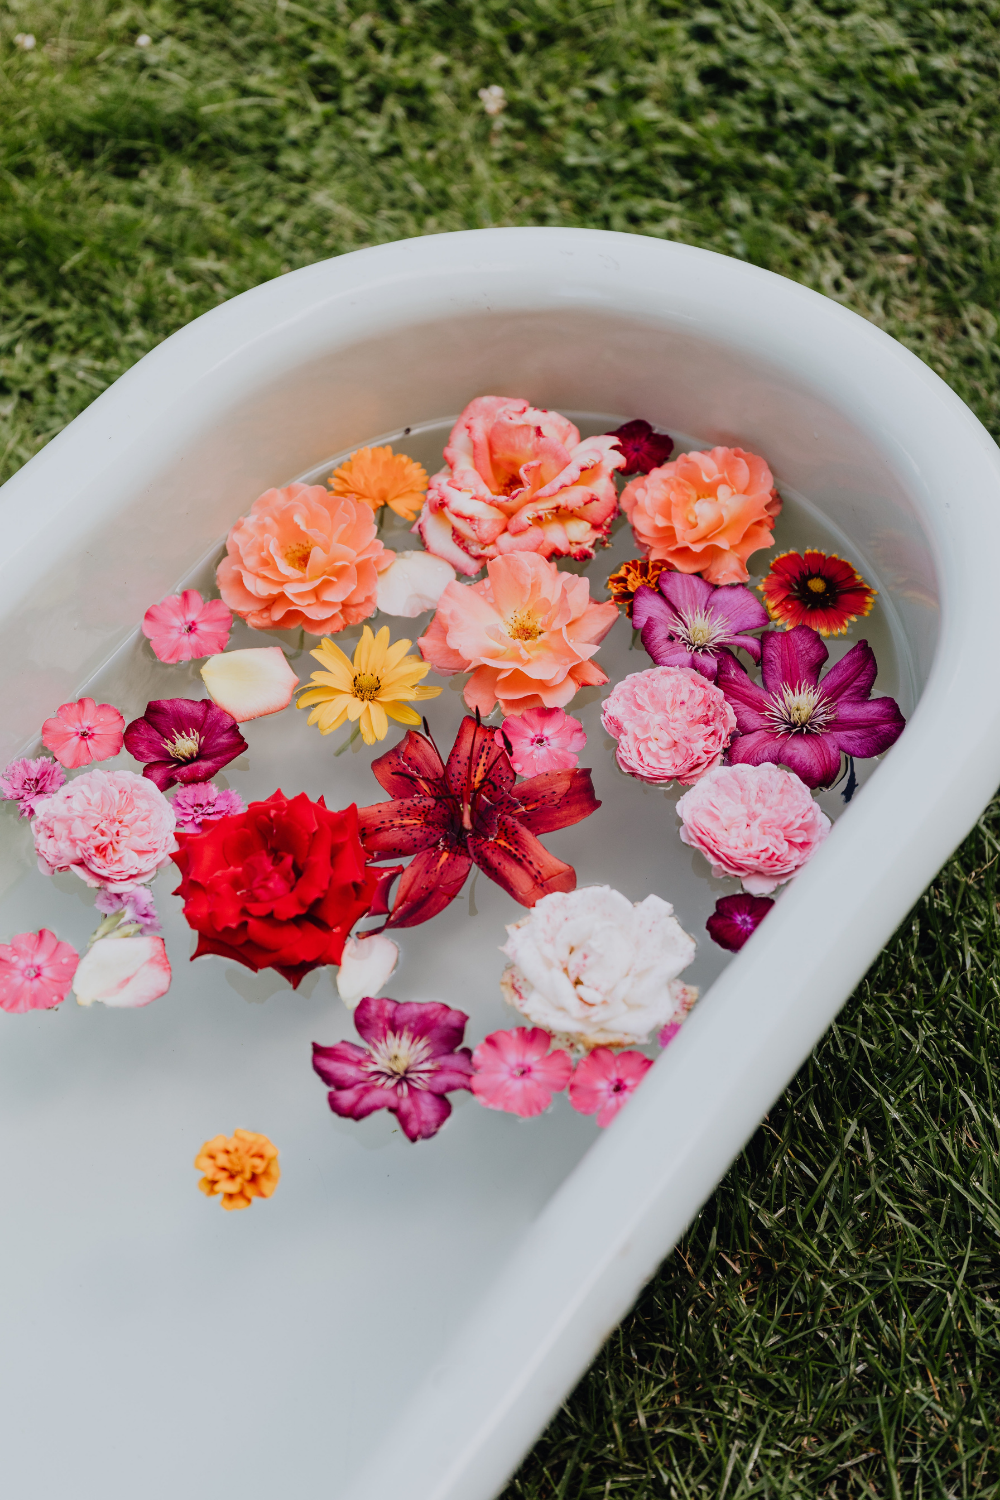 Bathtub filled with floating flowers